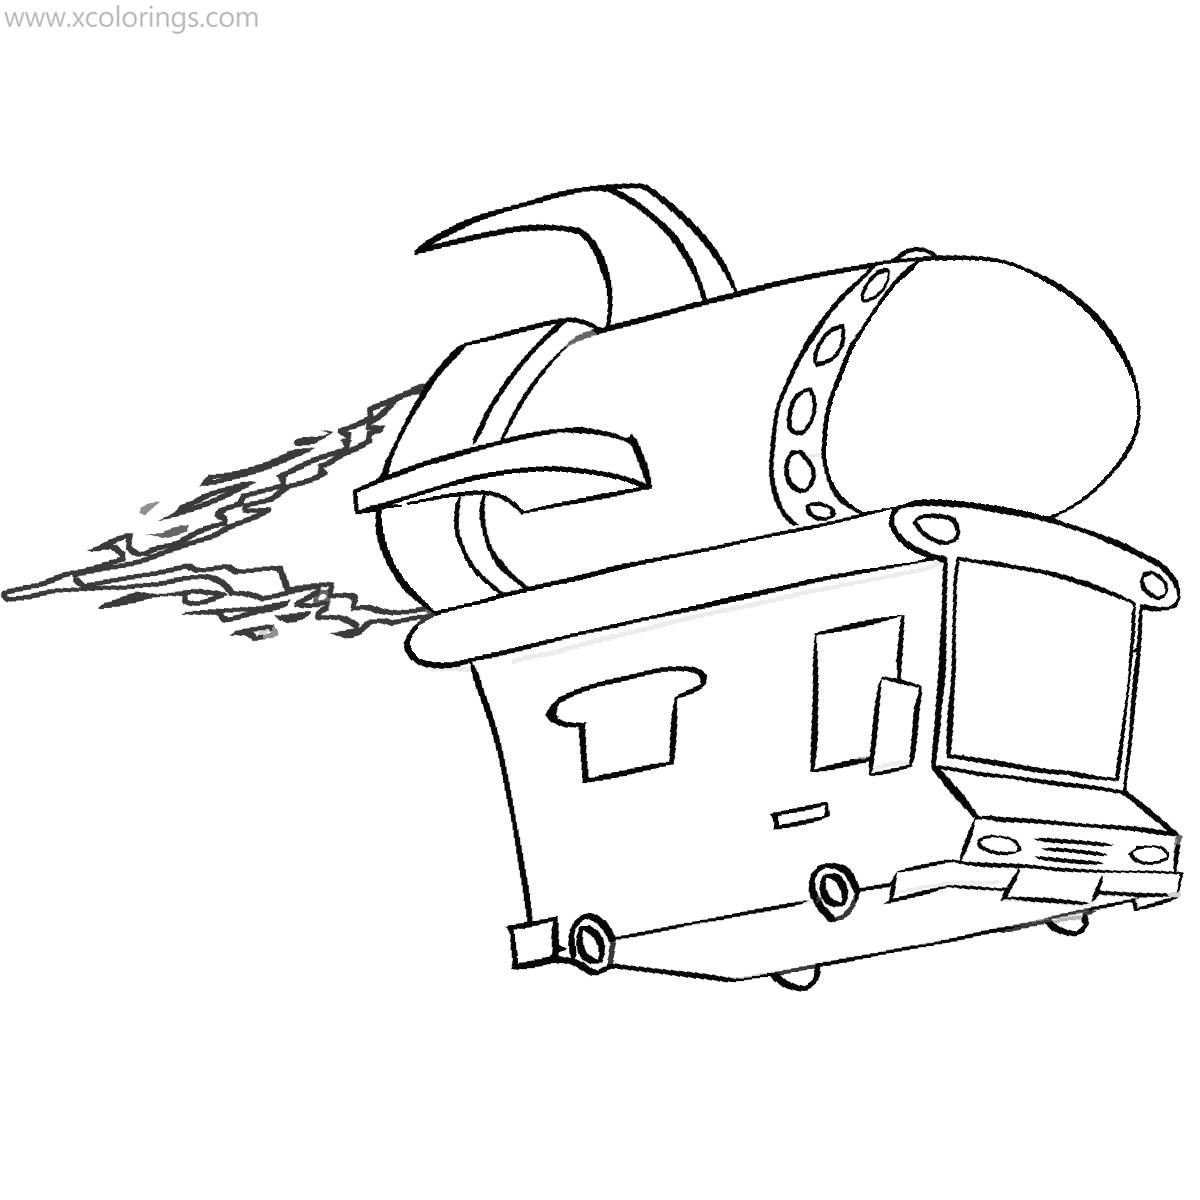 Free Breadwinners Coloring Pages Van with Rocket printable